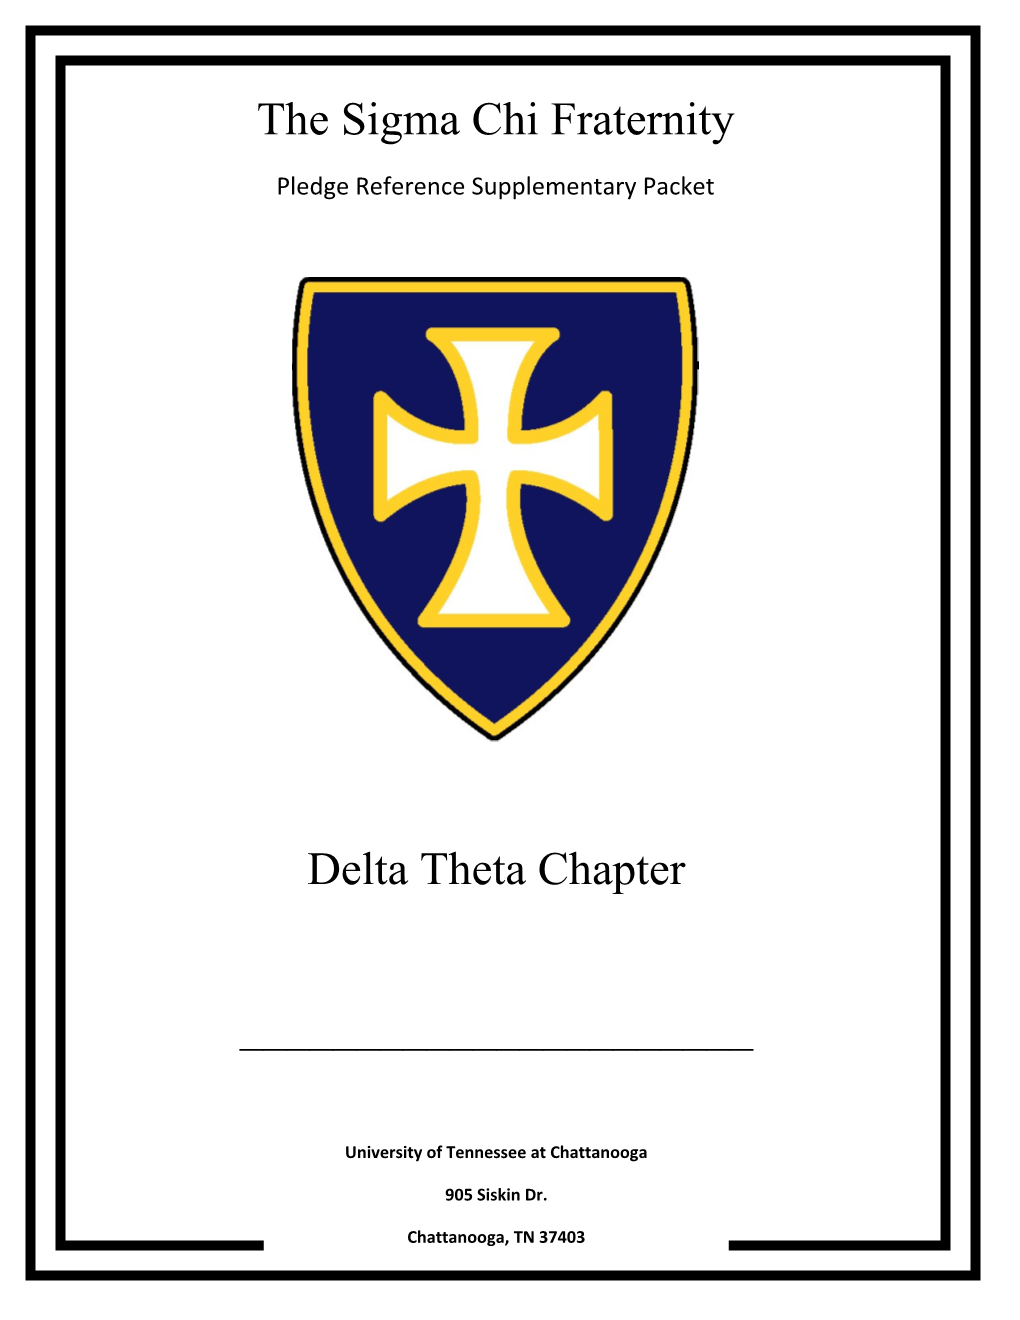 The Sigma Chi Fraternity